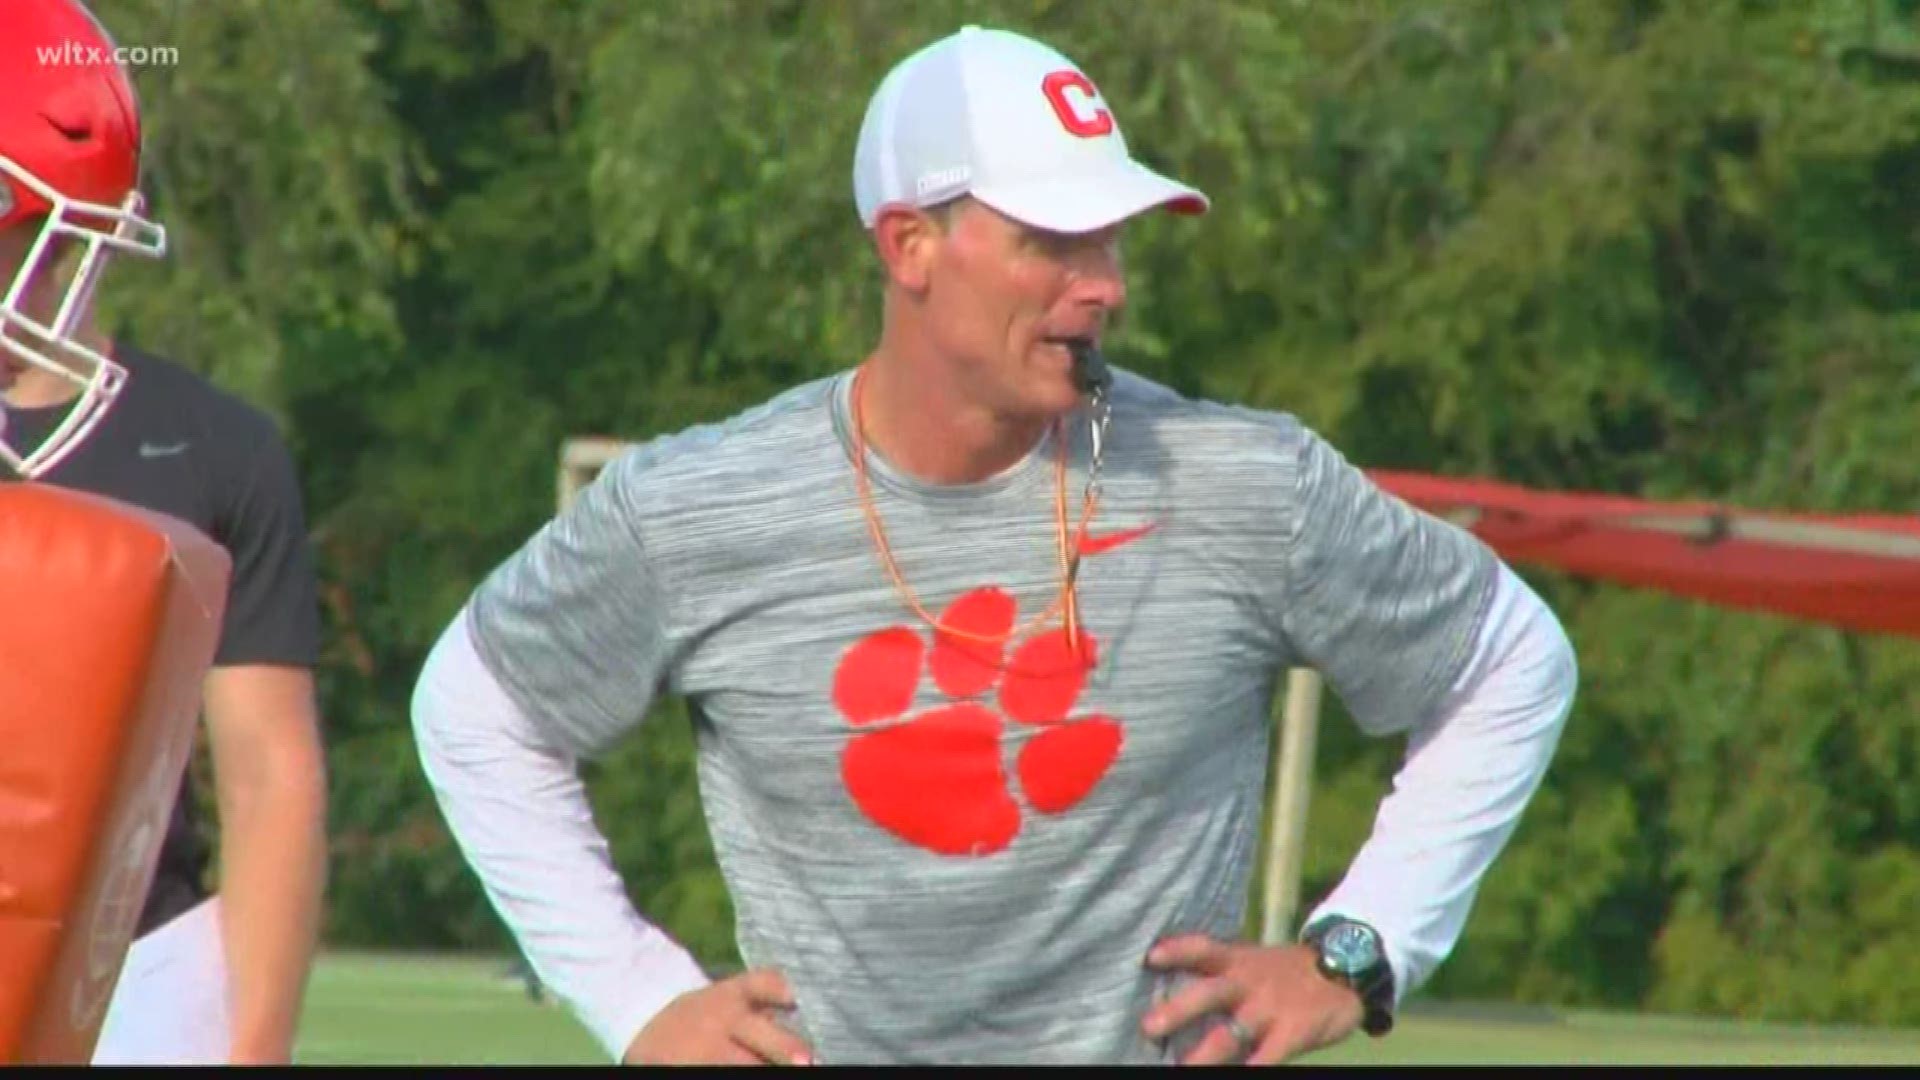 A lot of new faces are on Clemson's depth chart for the defense, but defensive coordinator Brent Venables applies the same standard for newcomers as he does for veterans.